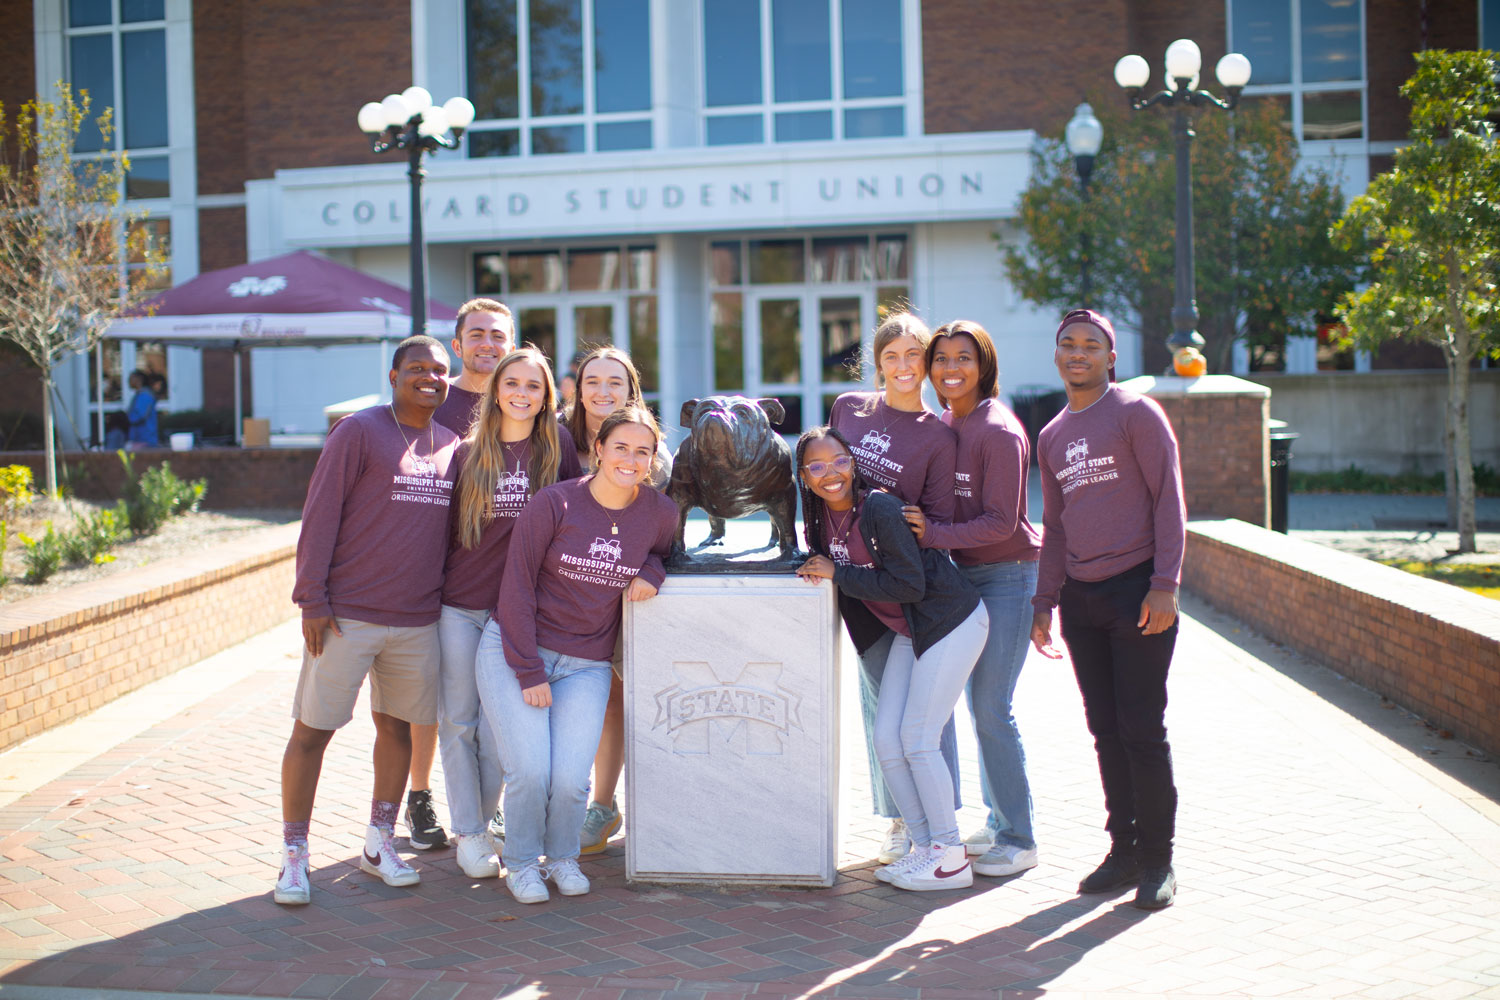 Orientation Leaders standing with the Bully statue.